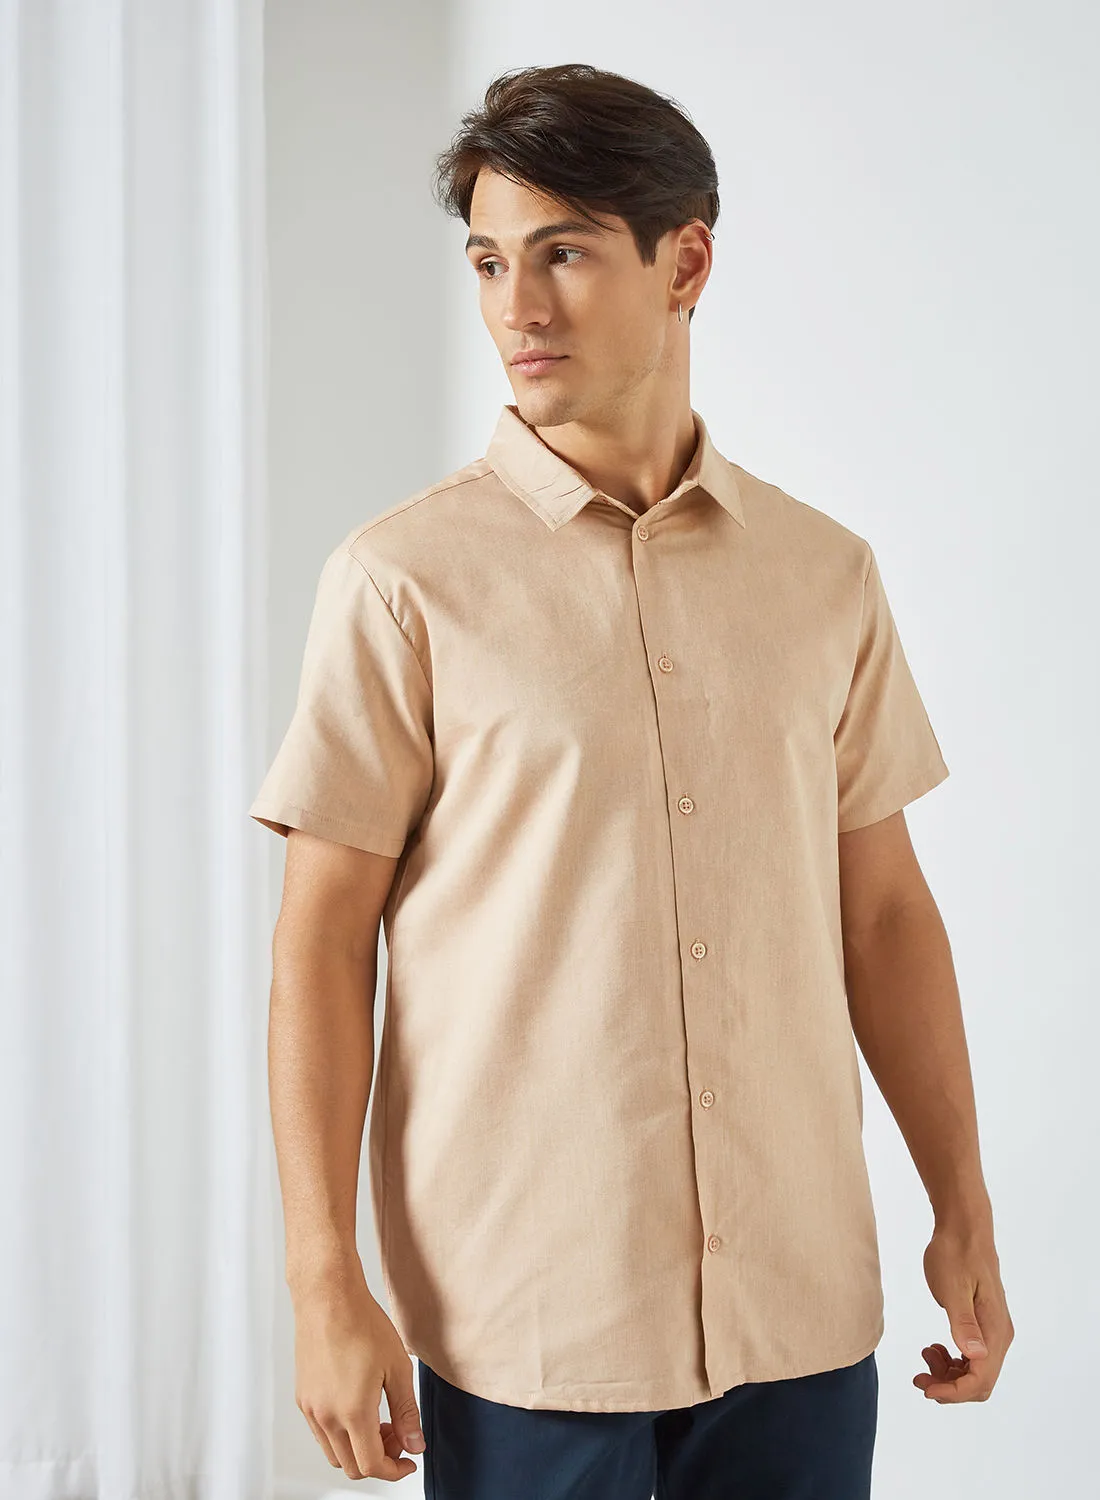 STATE 8 Oxford Chambray Short Sleeve Shirt Beige